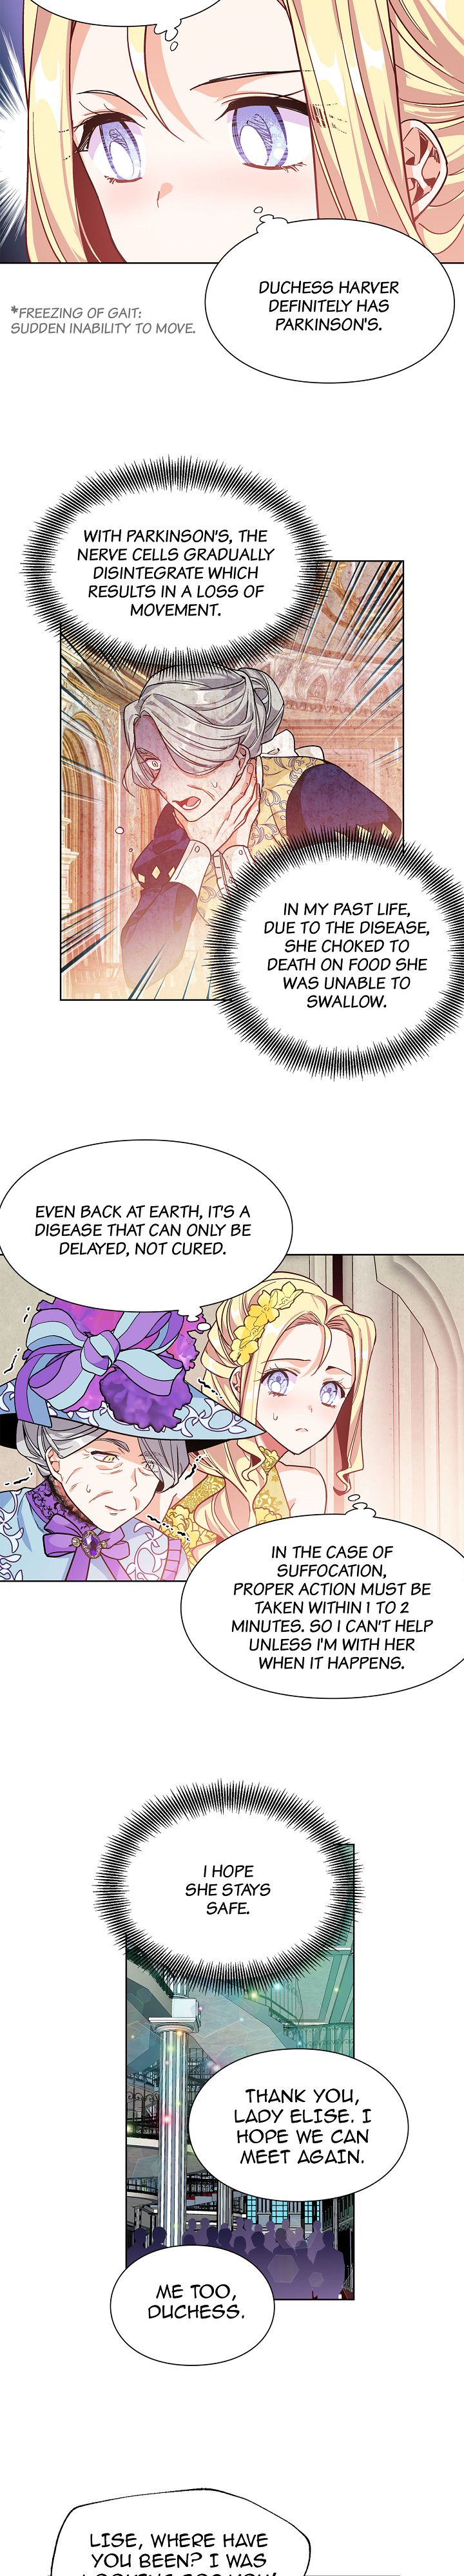 Doctor Elise - The Royal Lady with the Lamp - Chapter 33 Page 10